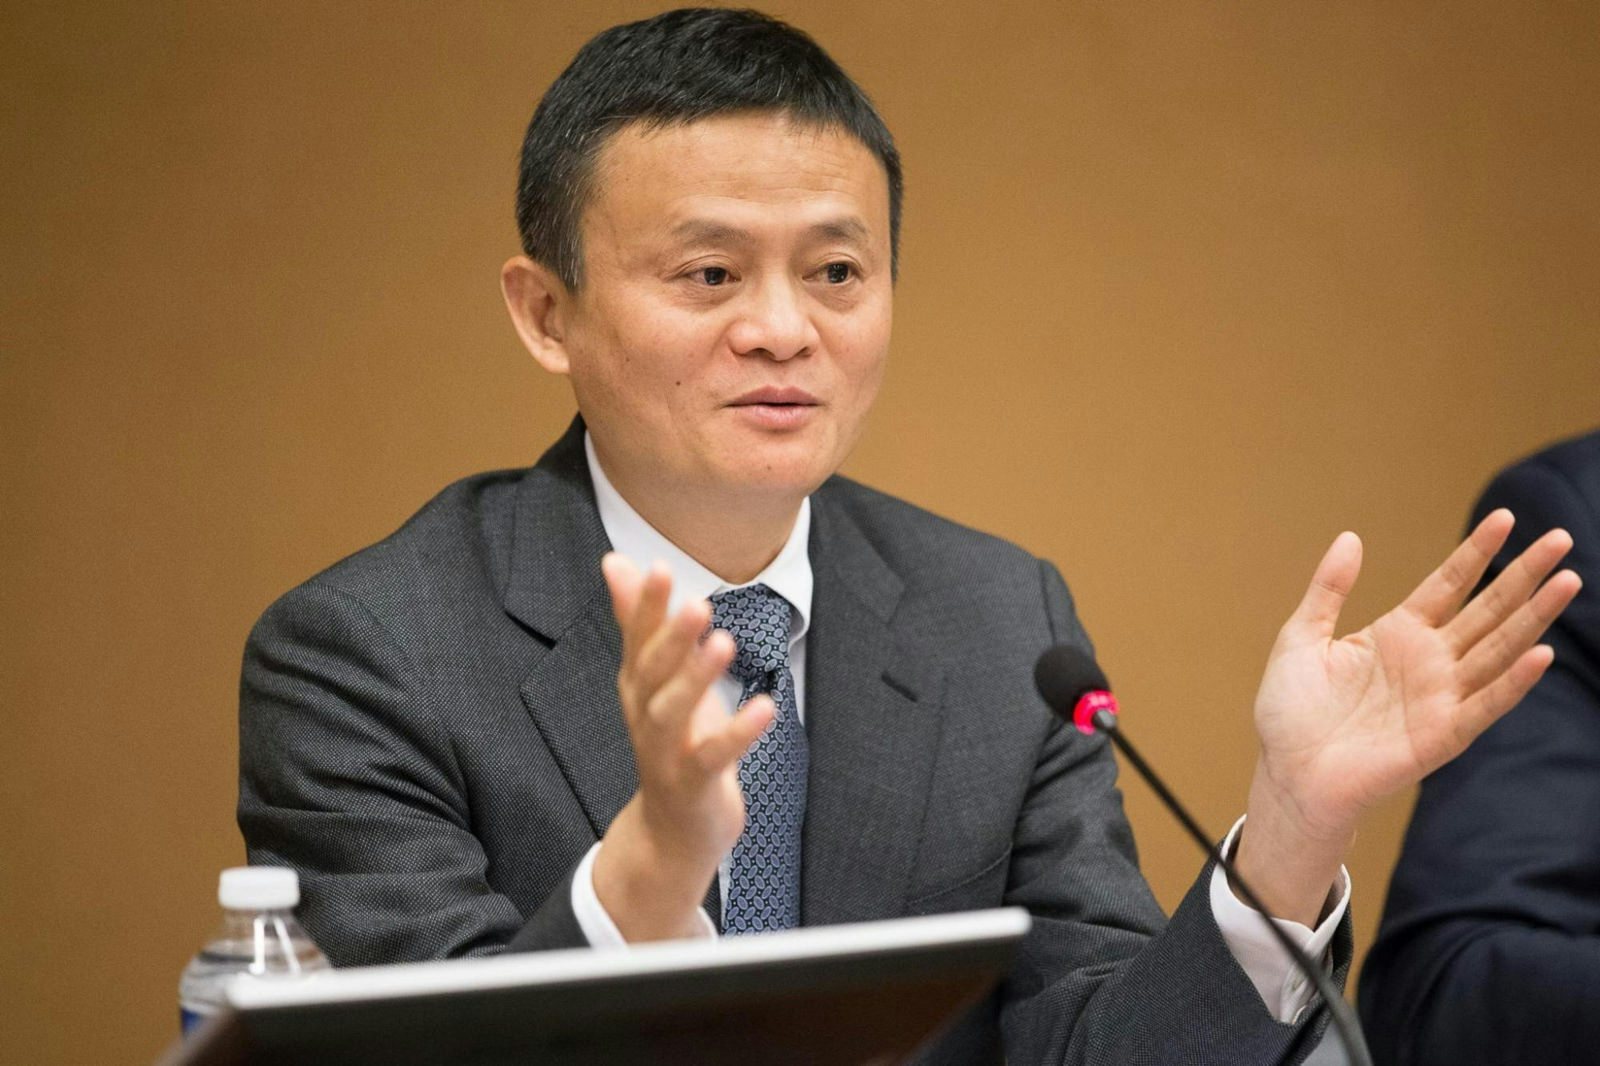 Alibaba's Jack Ma surpassed Dalian Wanda Group's Wang Jianlin to become China's richest man.
(UNCTAD on Flickr)